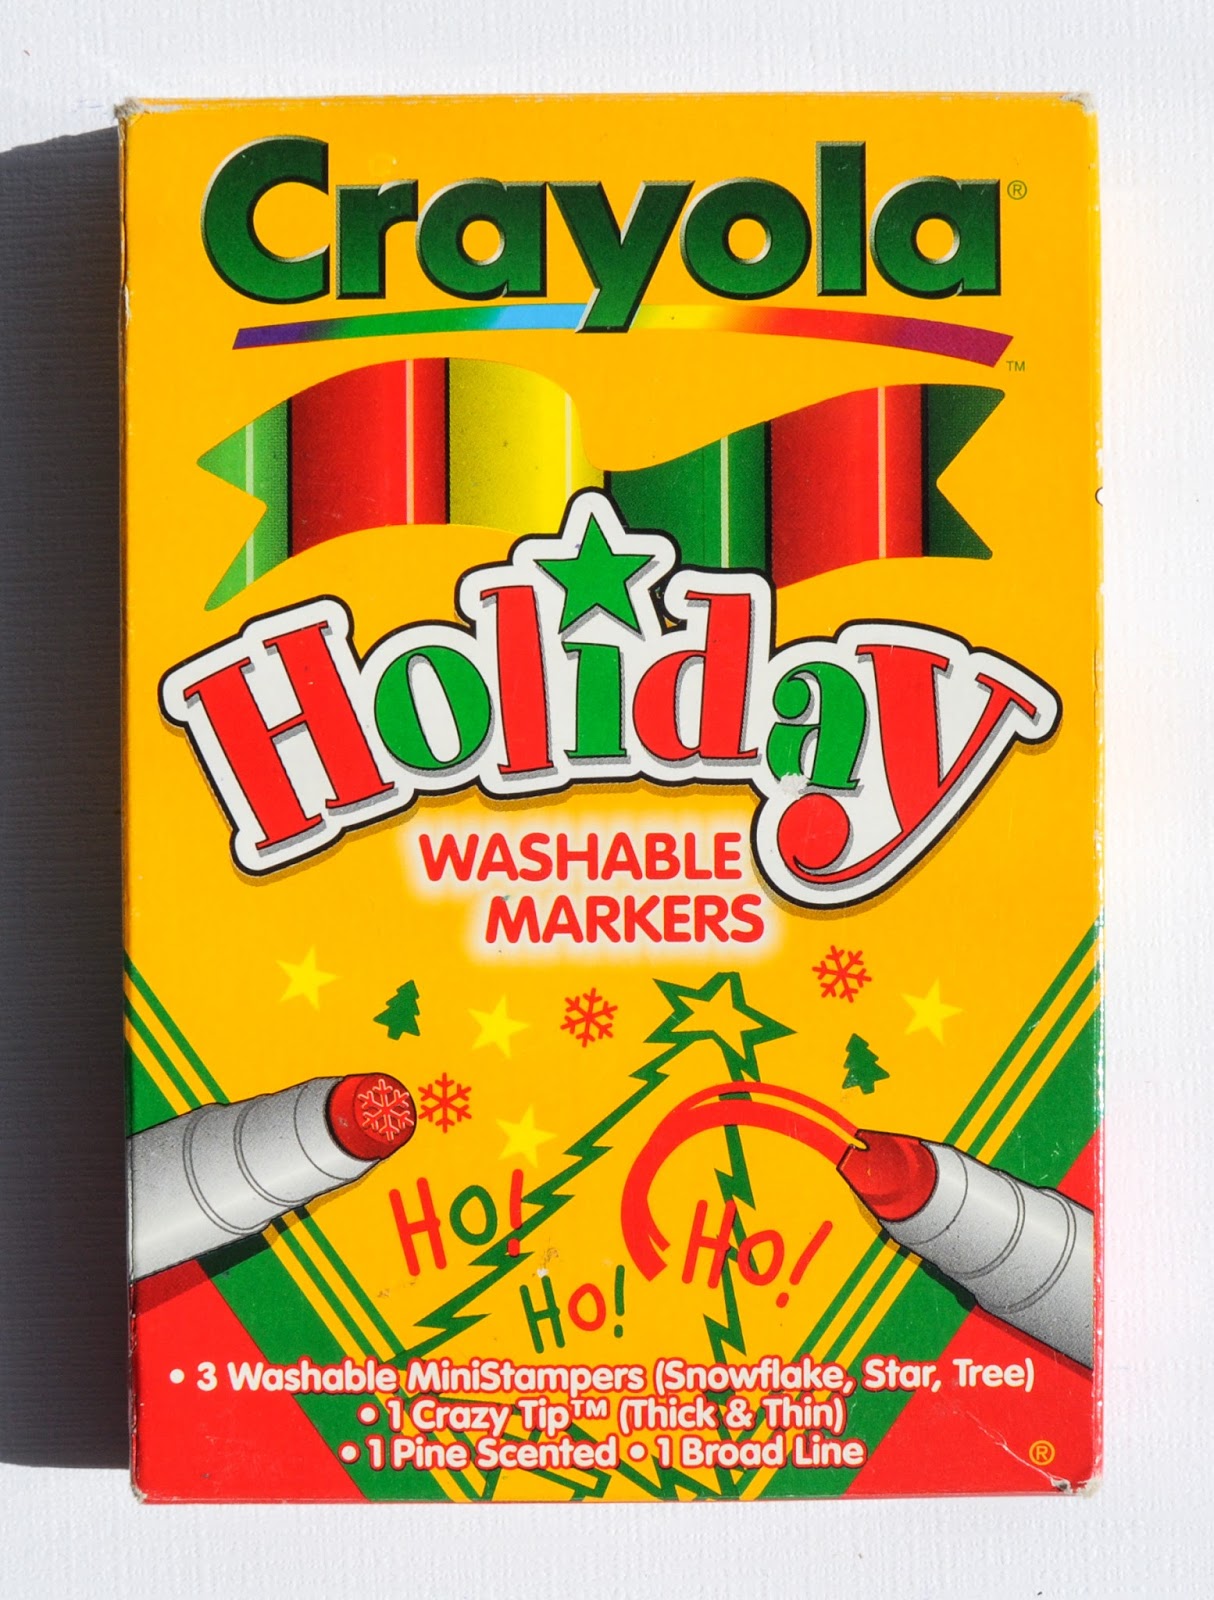 8 Count Crayola Triangular Crayons: What's Inside the Box